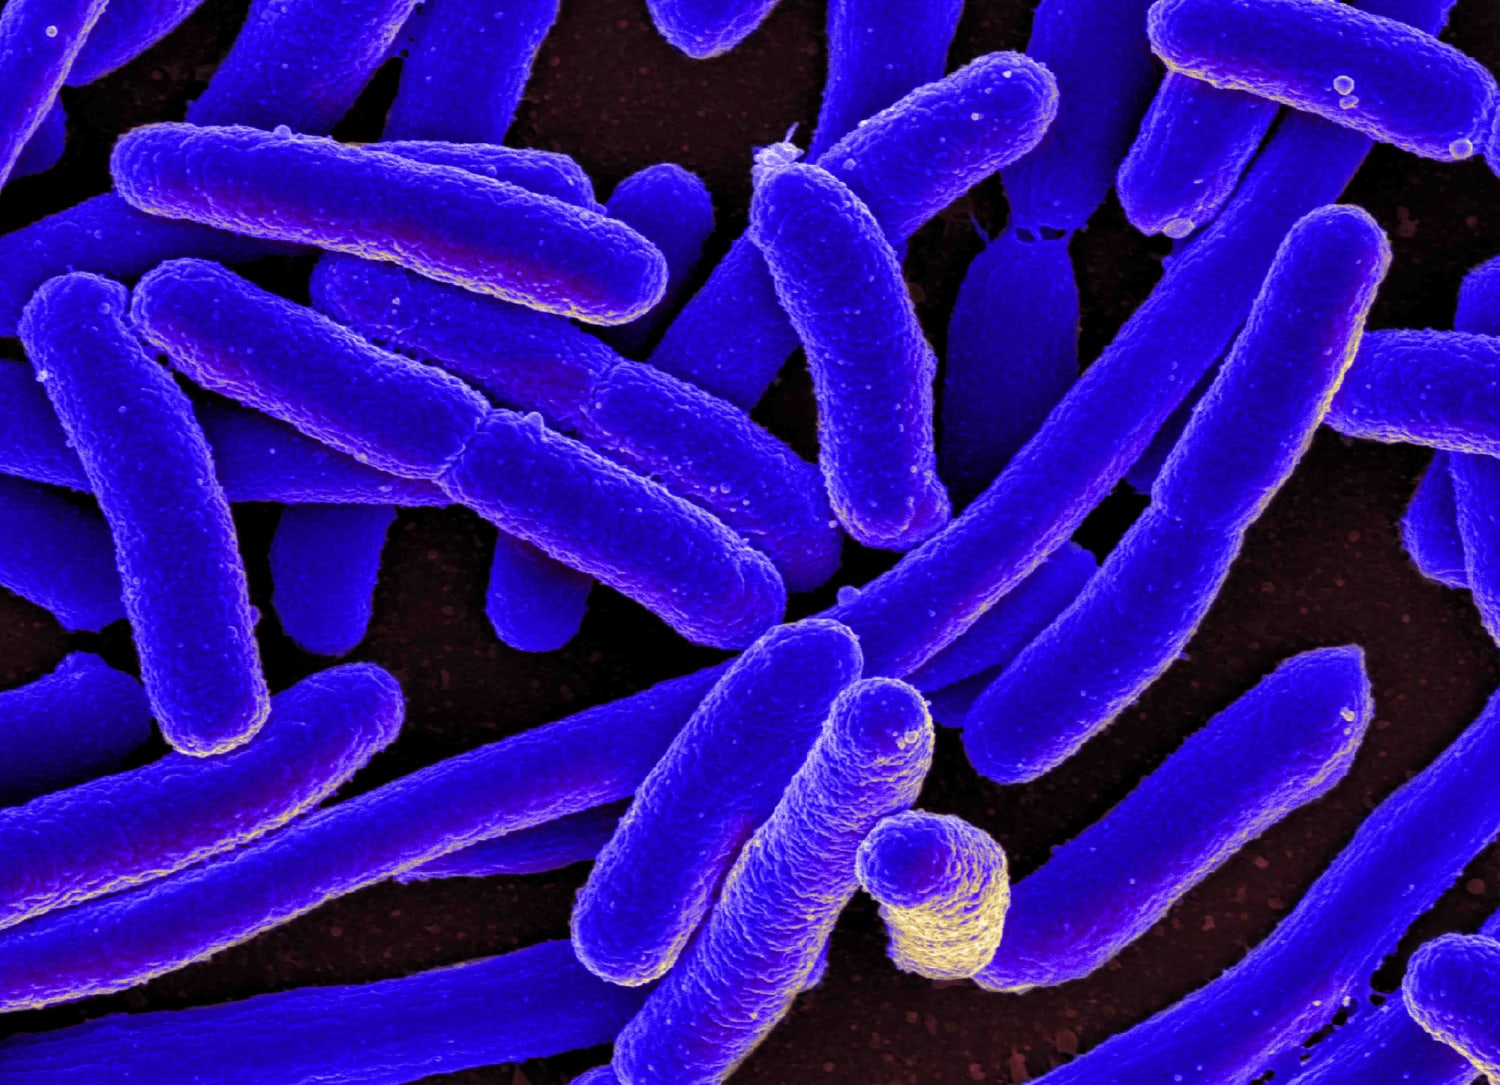 Fast Food Chain May Be Linked to Multistate E. Coli Outbreak